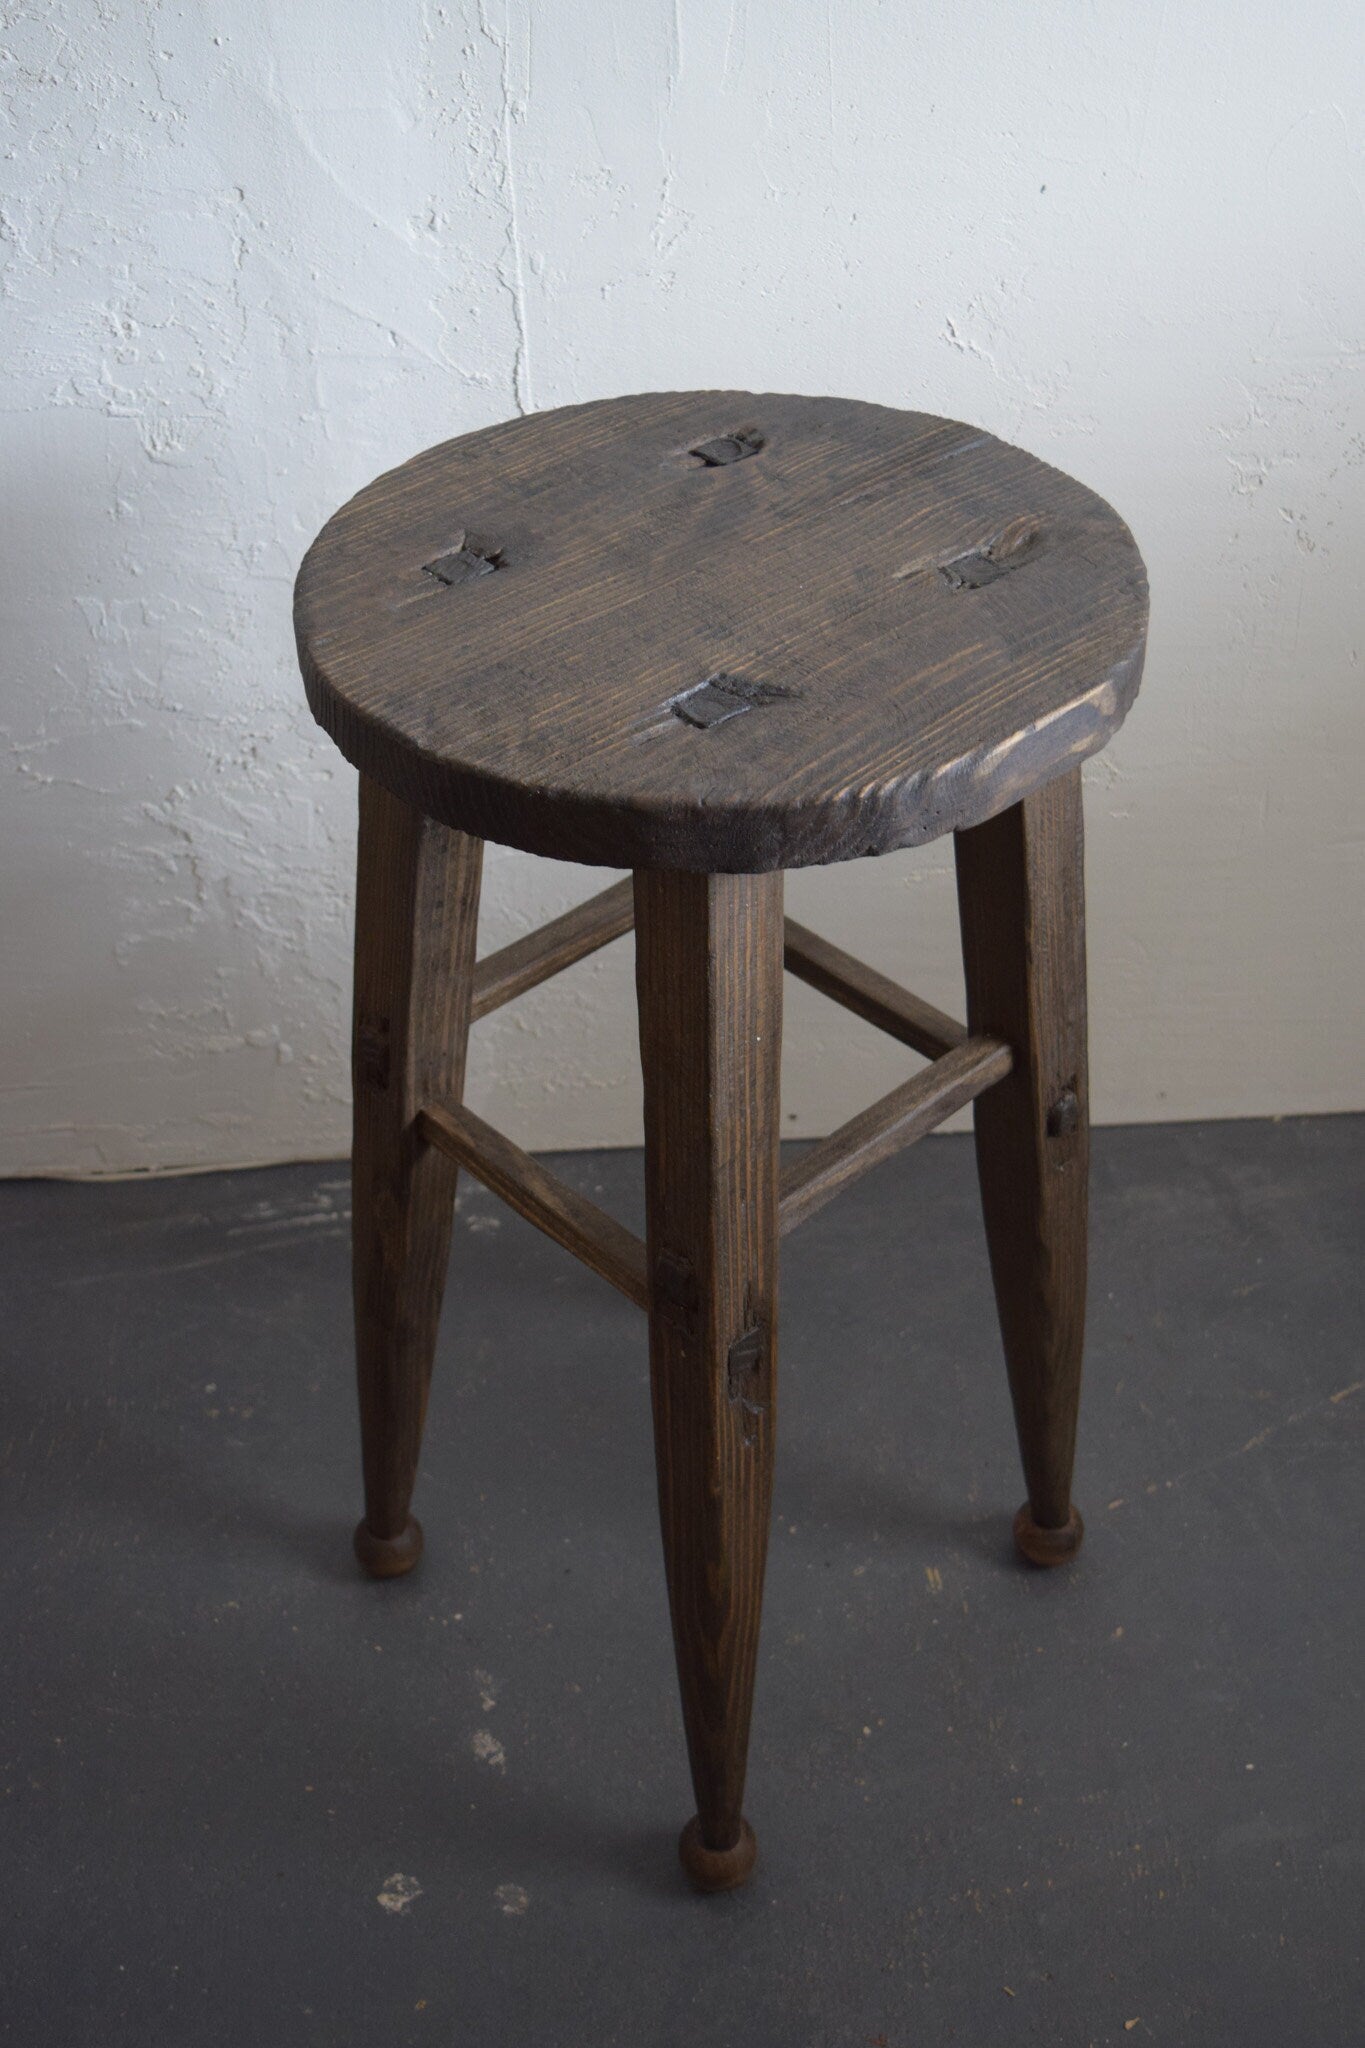 Tall Round Accent Stool/ Display Stand